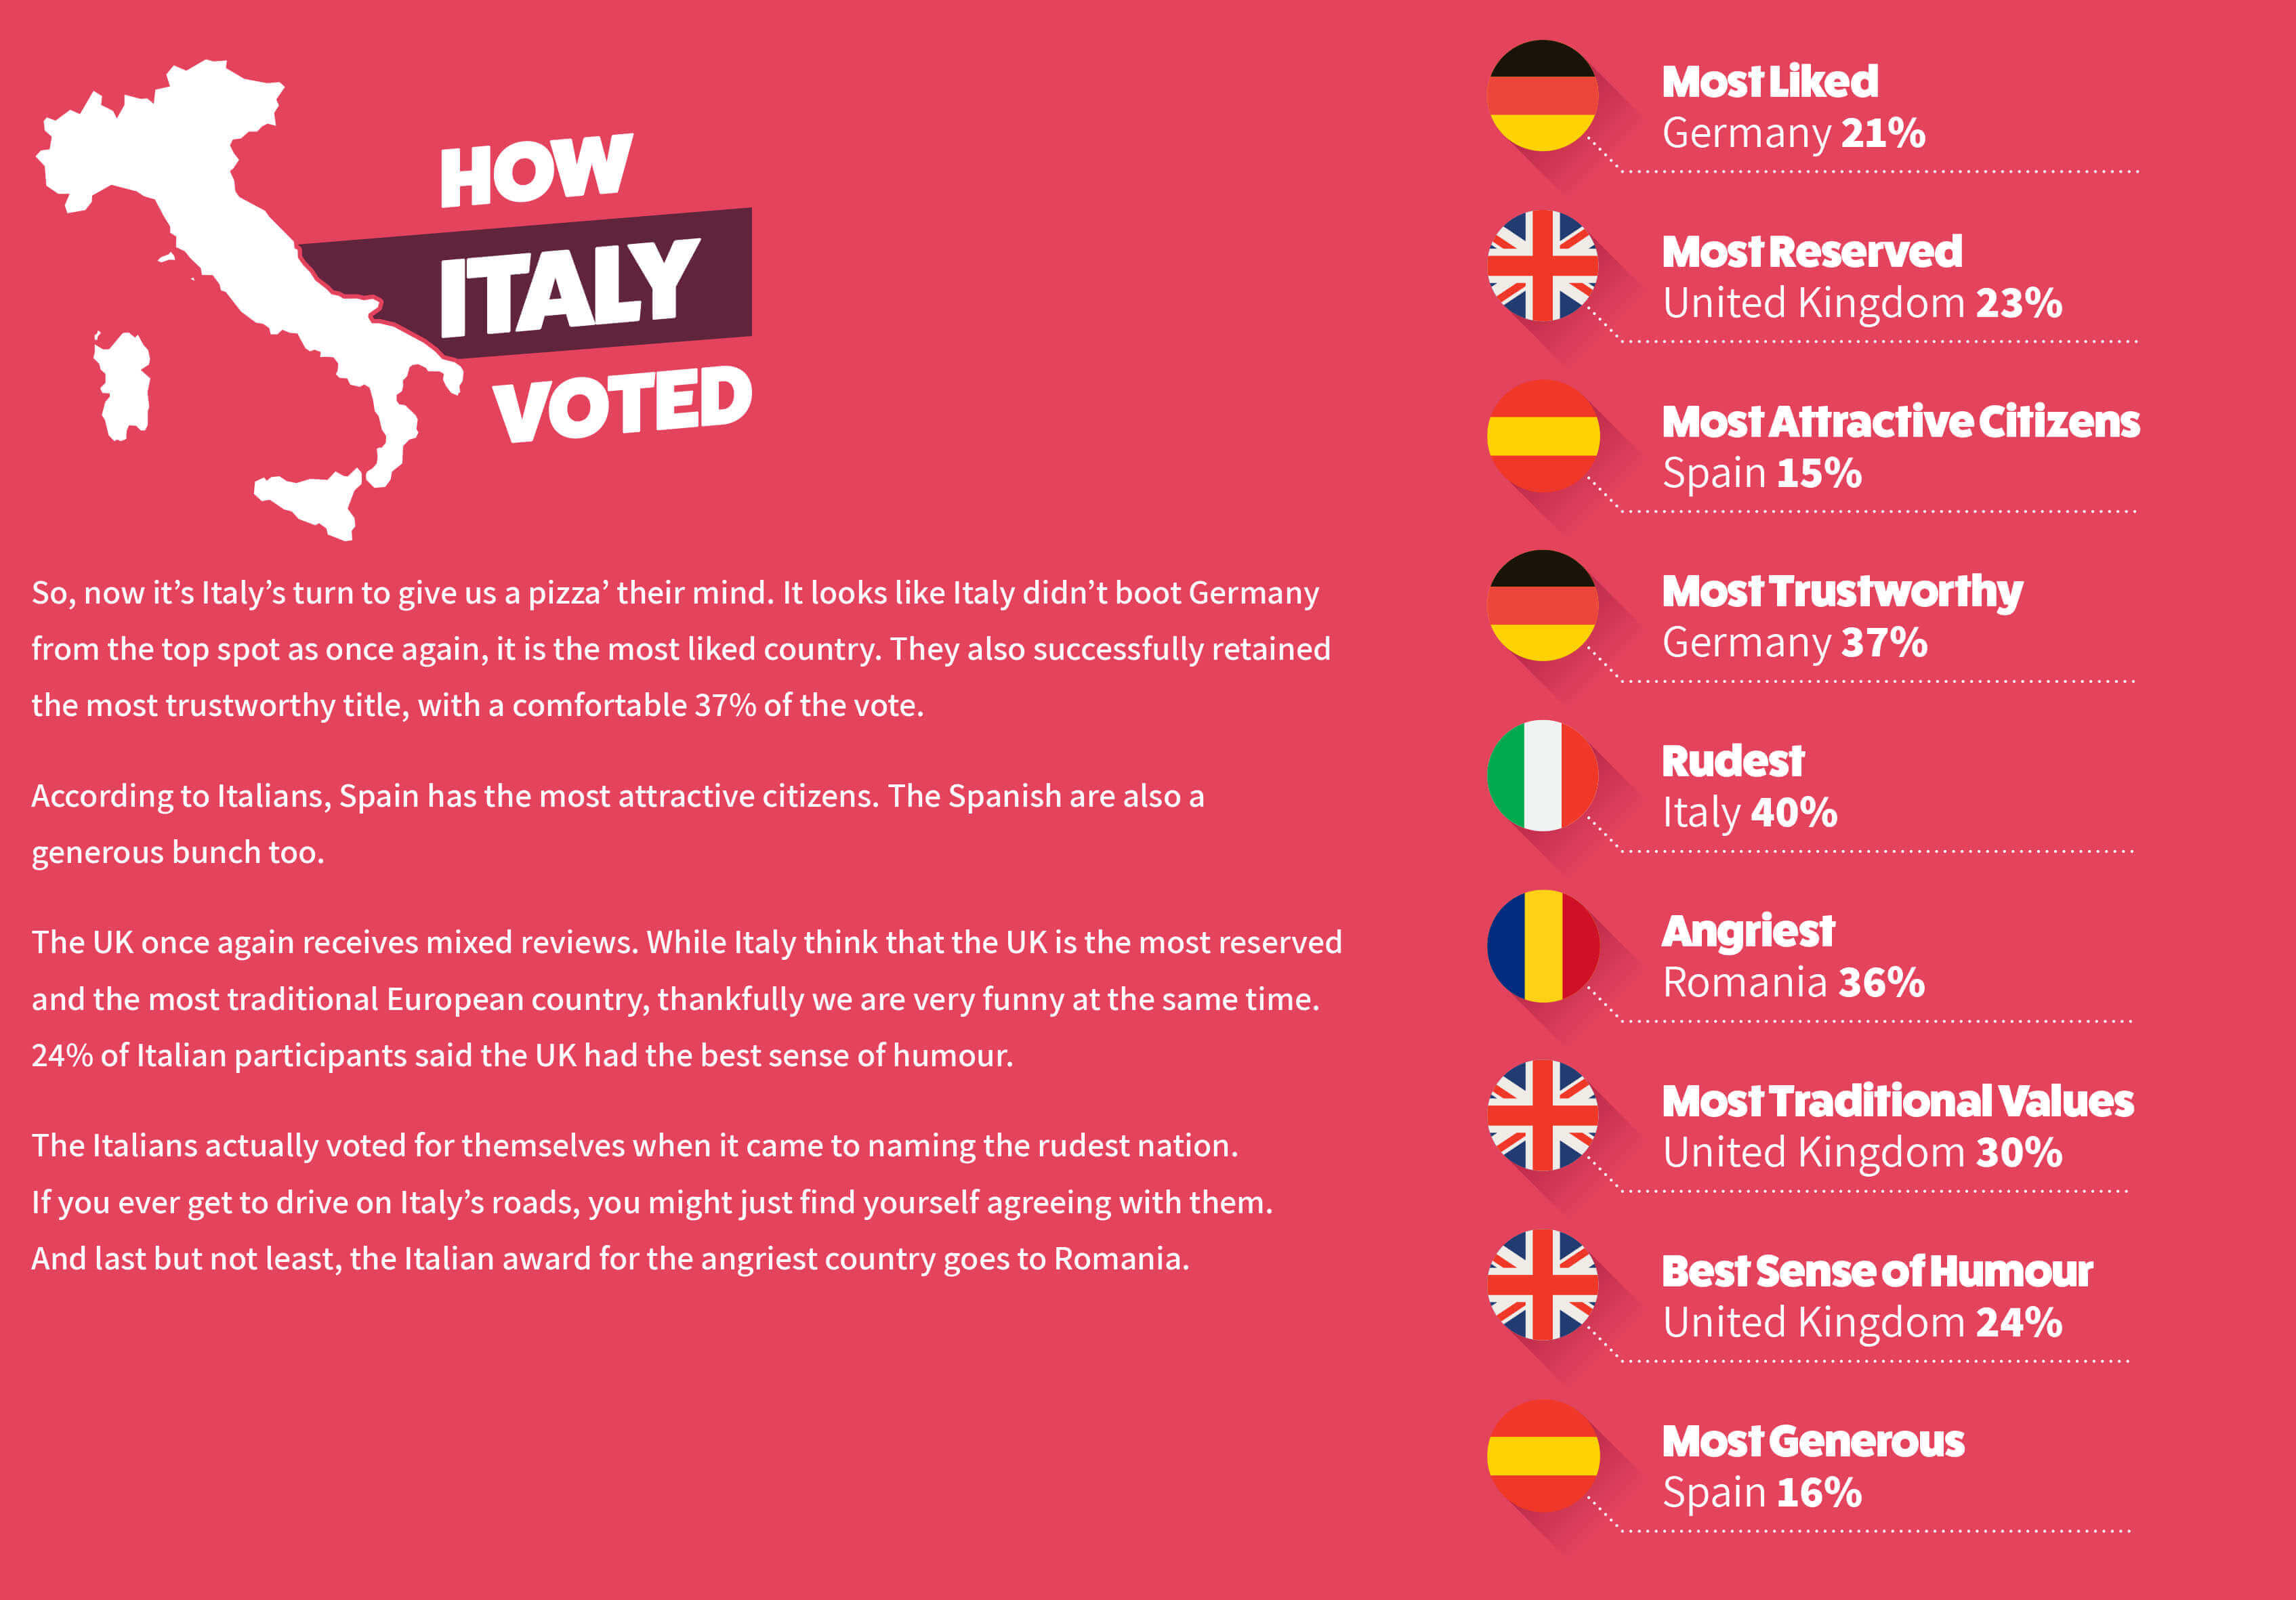 European stereotypes: what do we really think of each other?